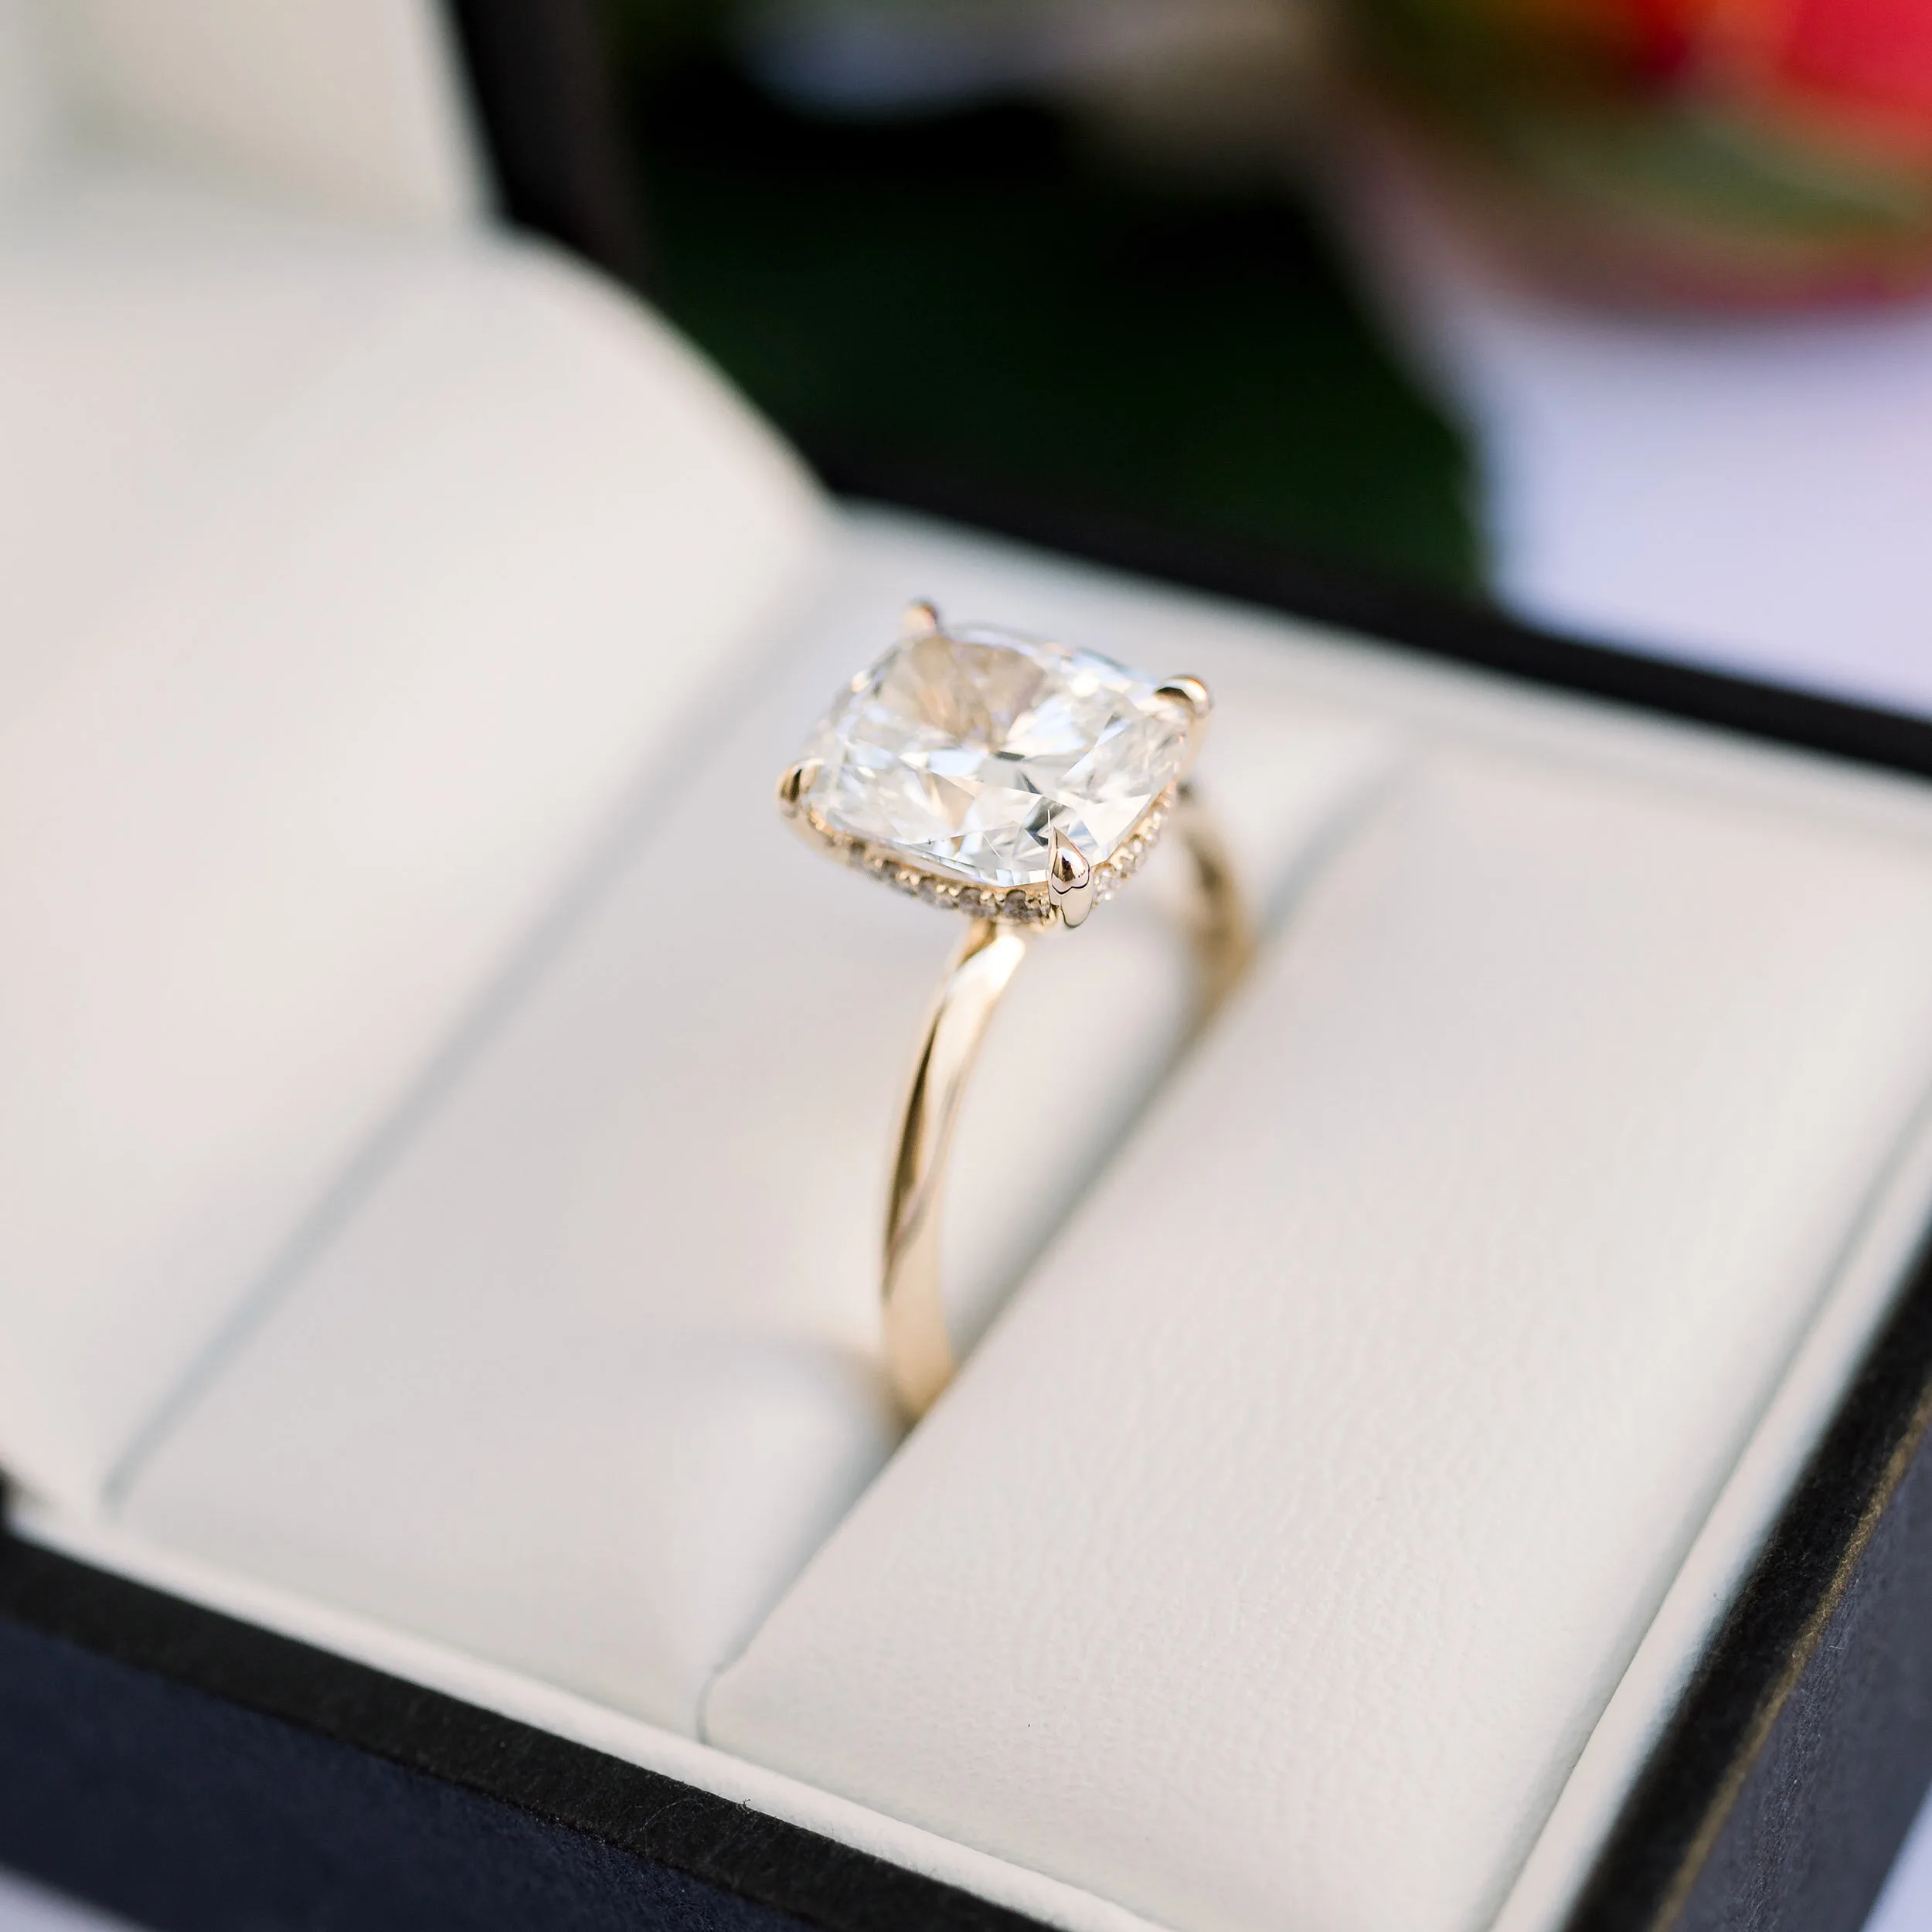 14k Yellow Gold 2.75ct Cushion Lab Diamond Solitaire Engagement Ring with Knife Edge Band and 1mm Hidden Halo Ada Diamonds Design Ad-221 Profile